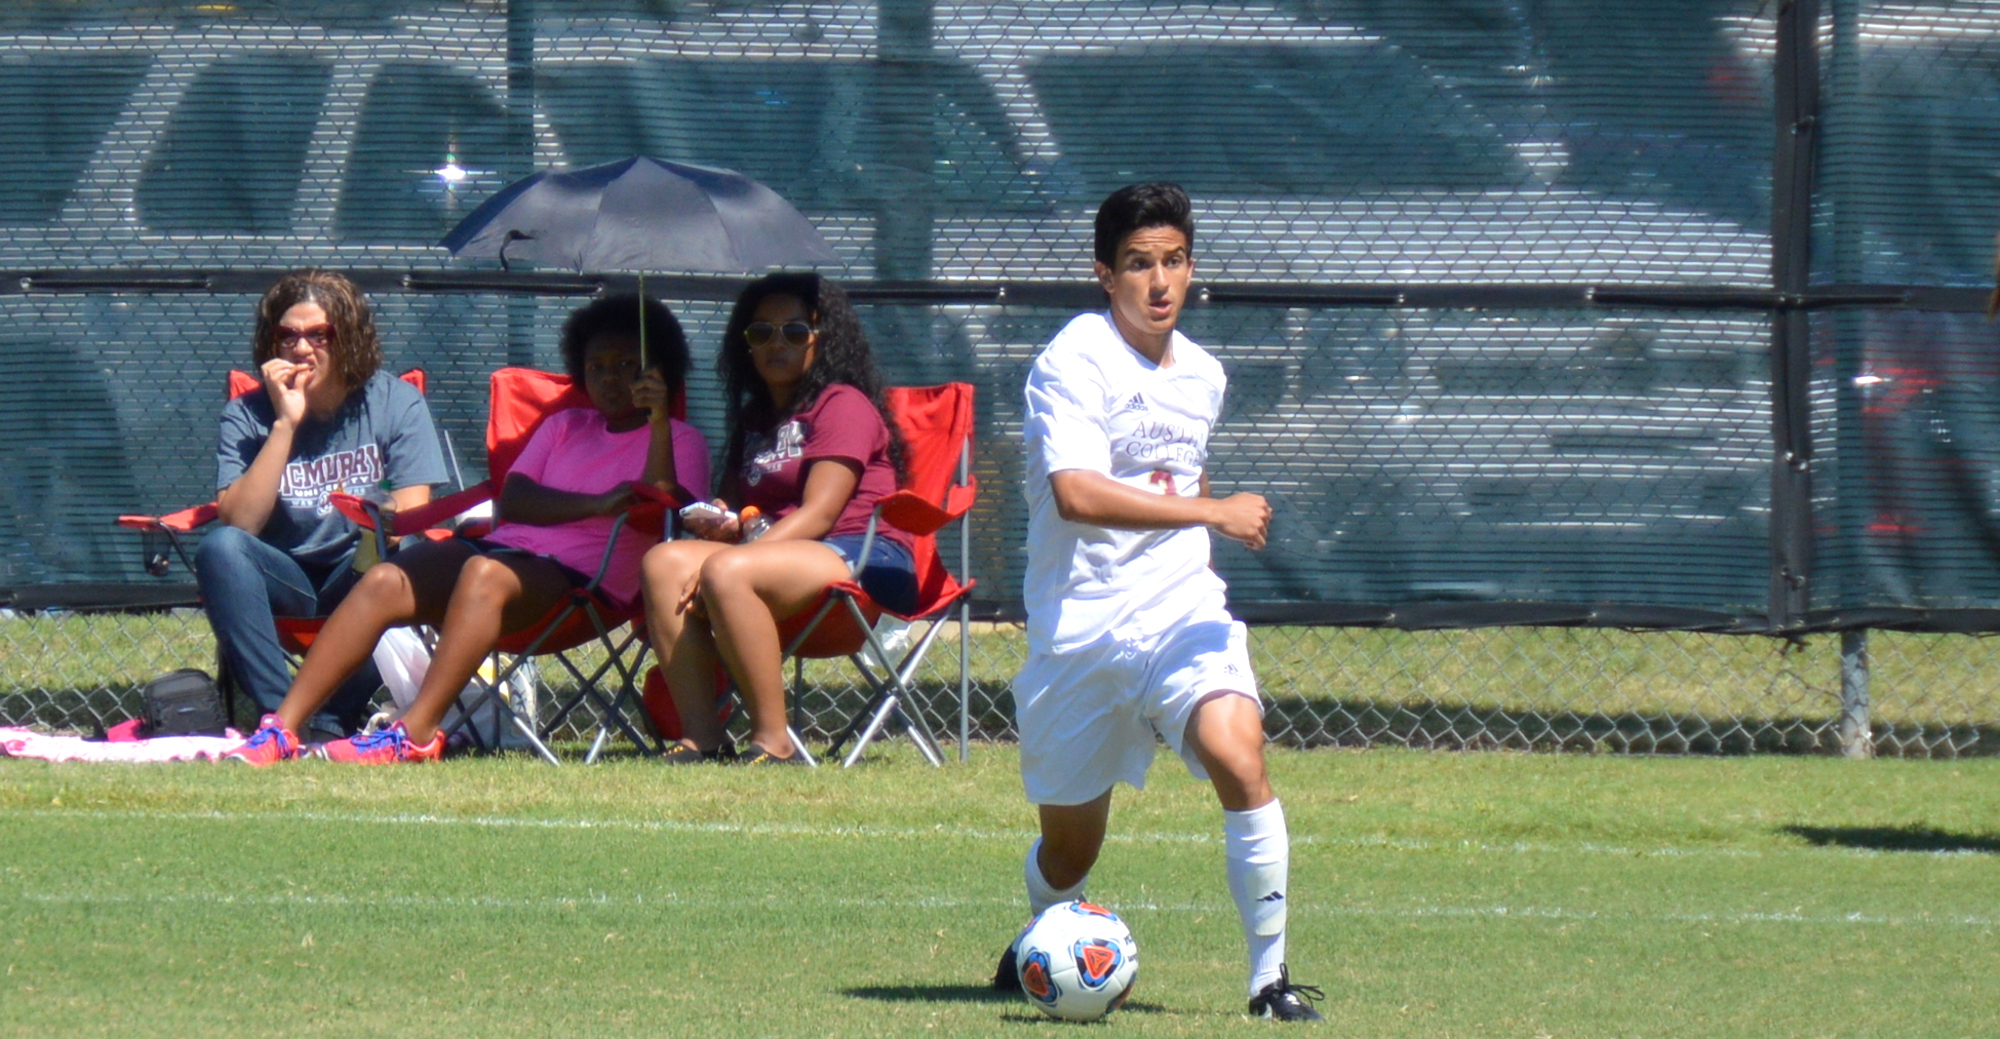 'Roos Earn Dramatic Double OT Win Over Schreiner